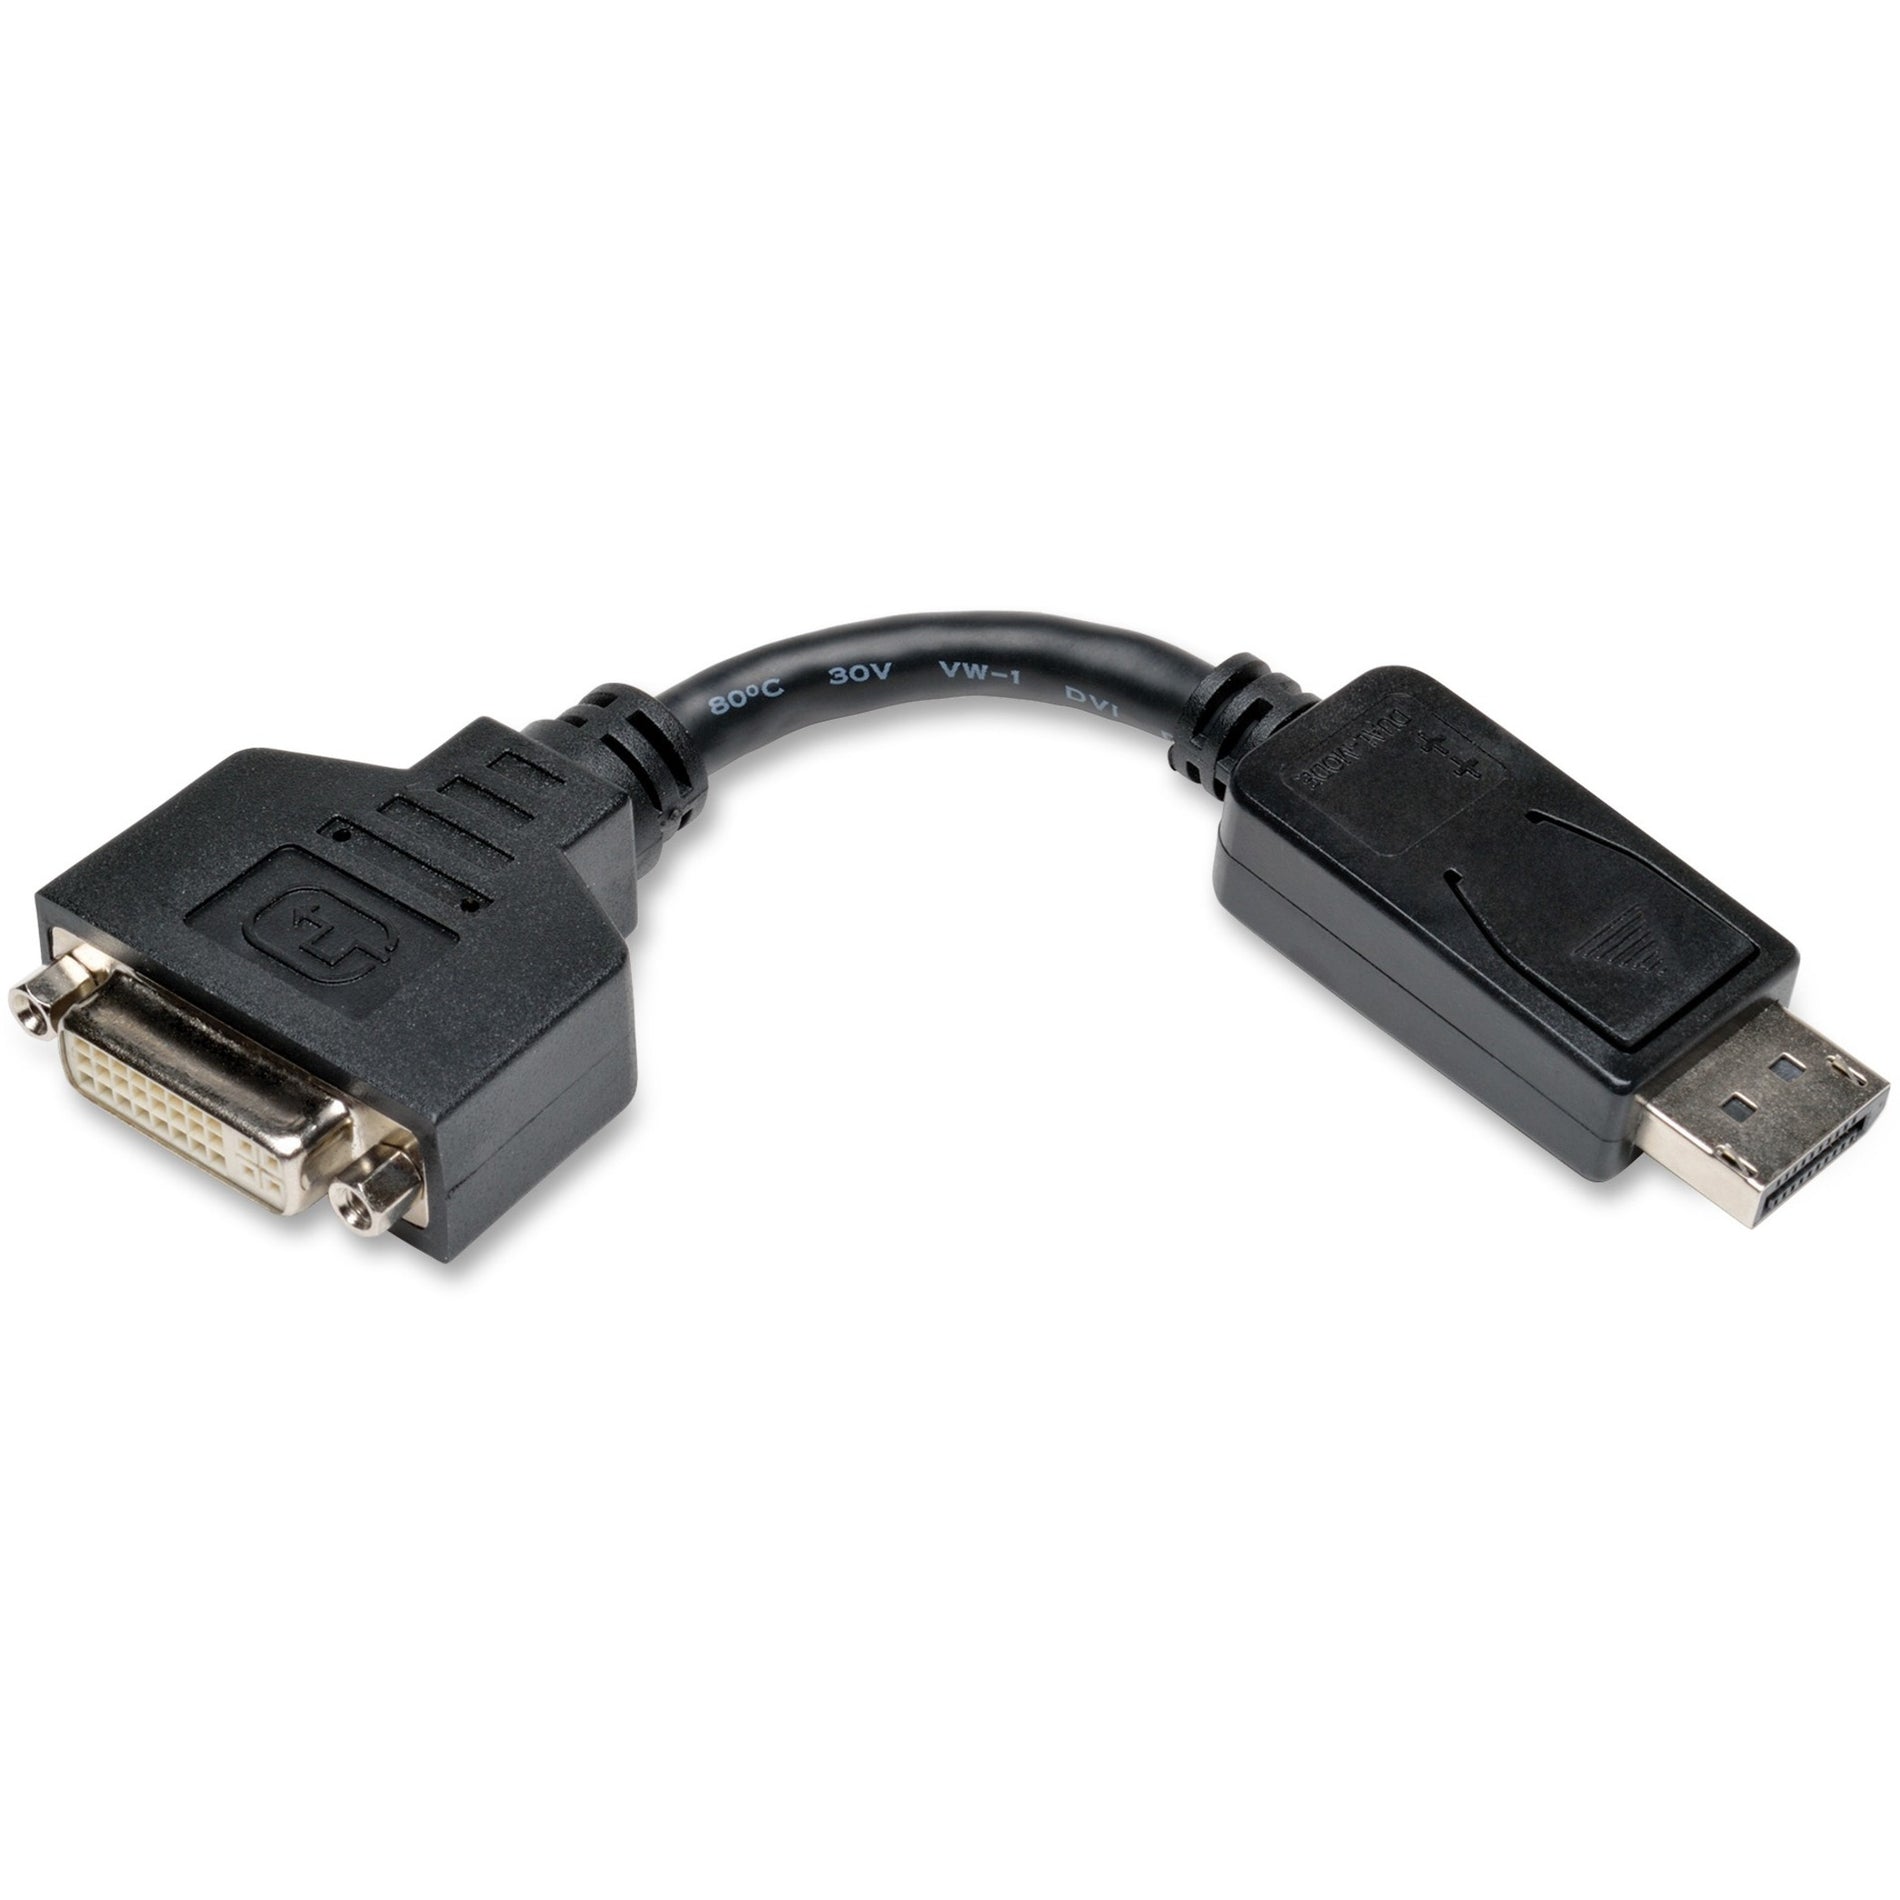 Tripp Lite P134-000 DisplayPort to DVI Cable Adapter, Black - Connect Your DisplayPort Device to a DVI Monitor